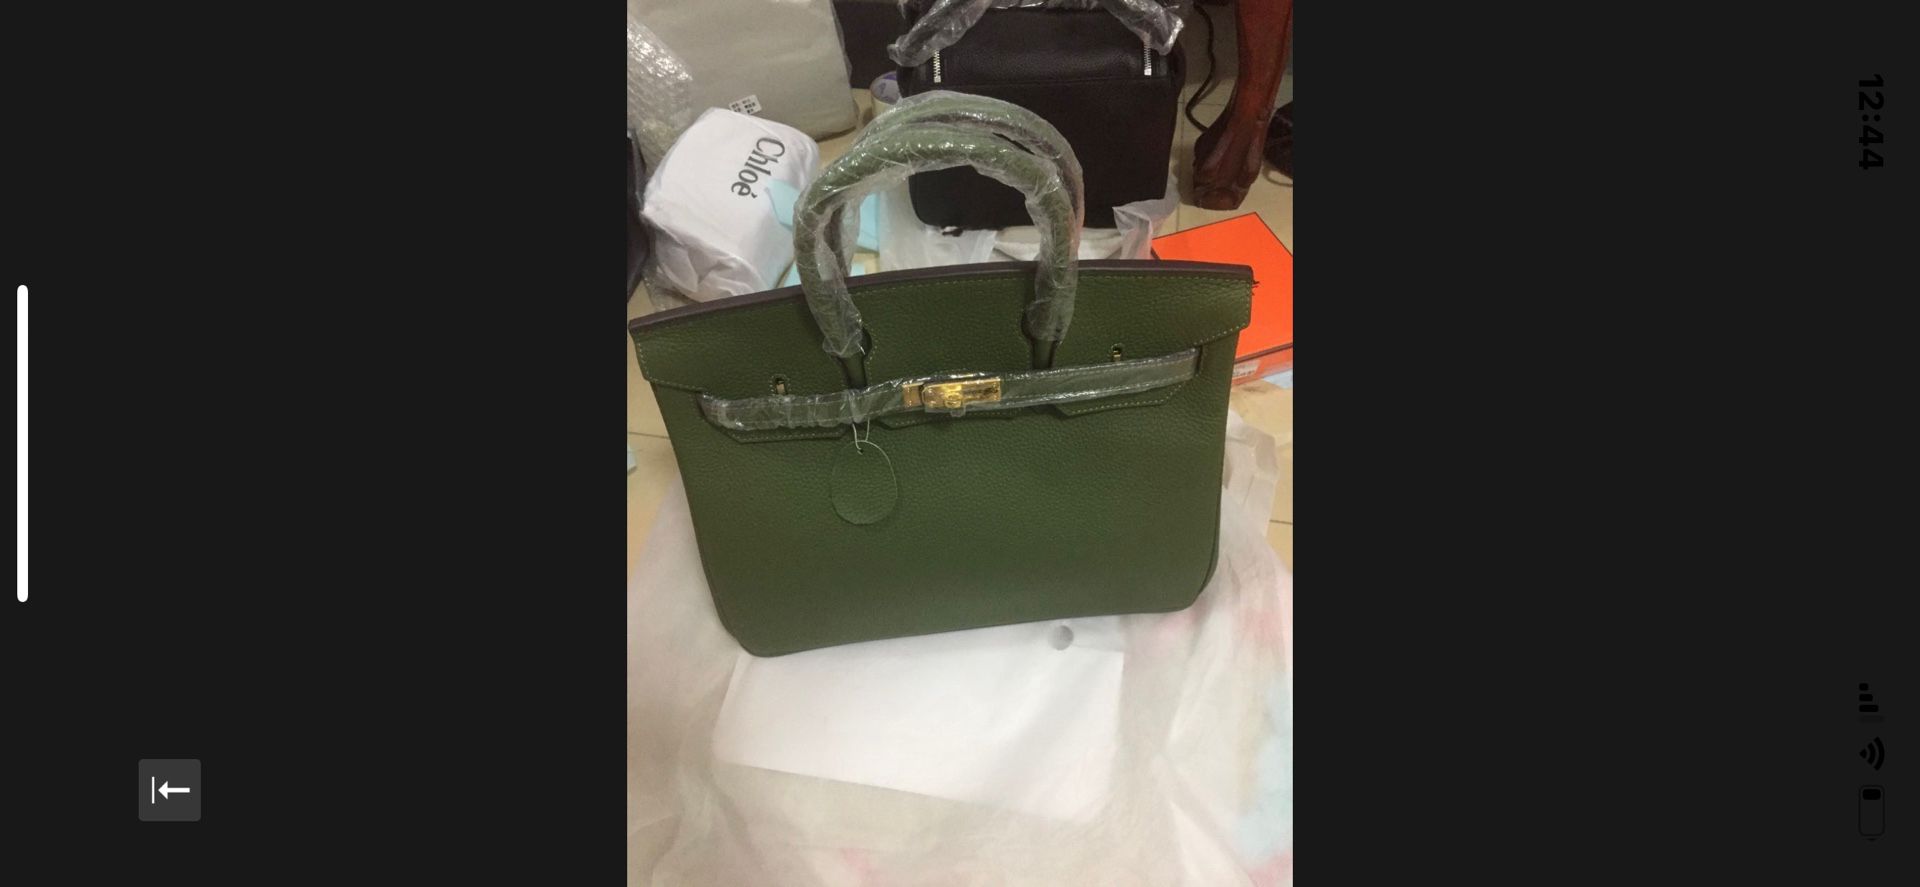 Hermes Birkin NWT Army Green Leather Satchel for Sale in North Miami Beach,  FL - OfferUp